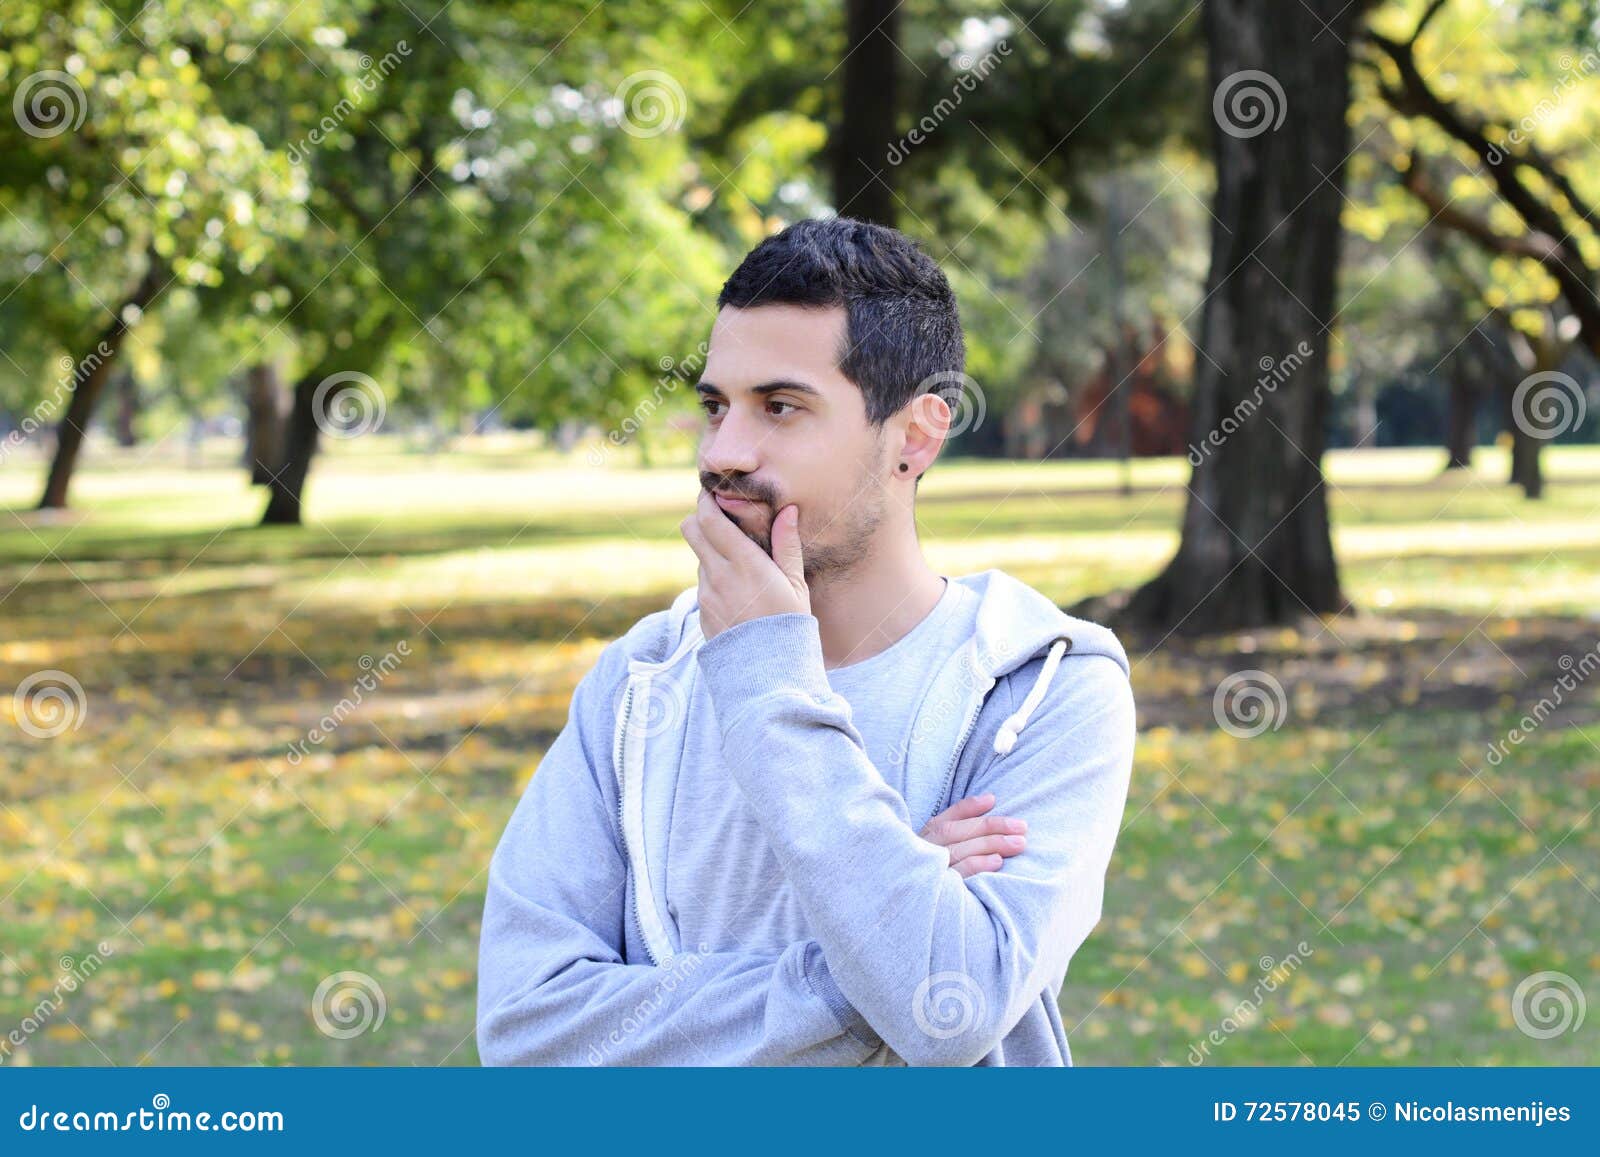 young latin man thoughtful in a park.